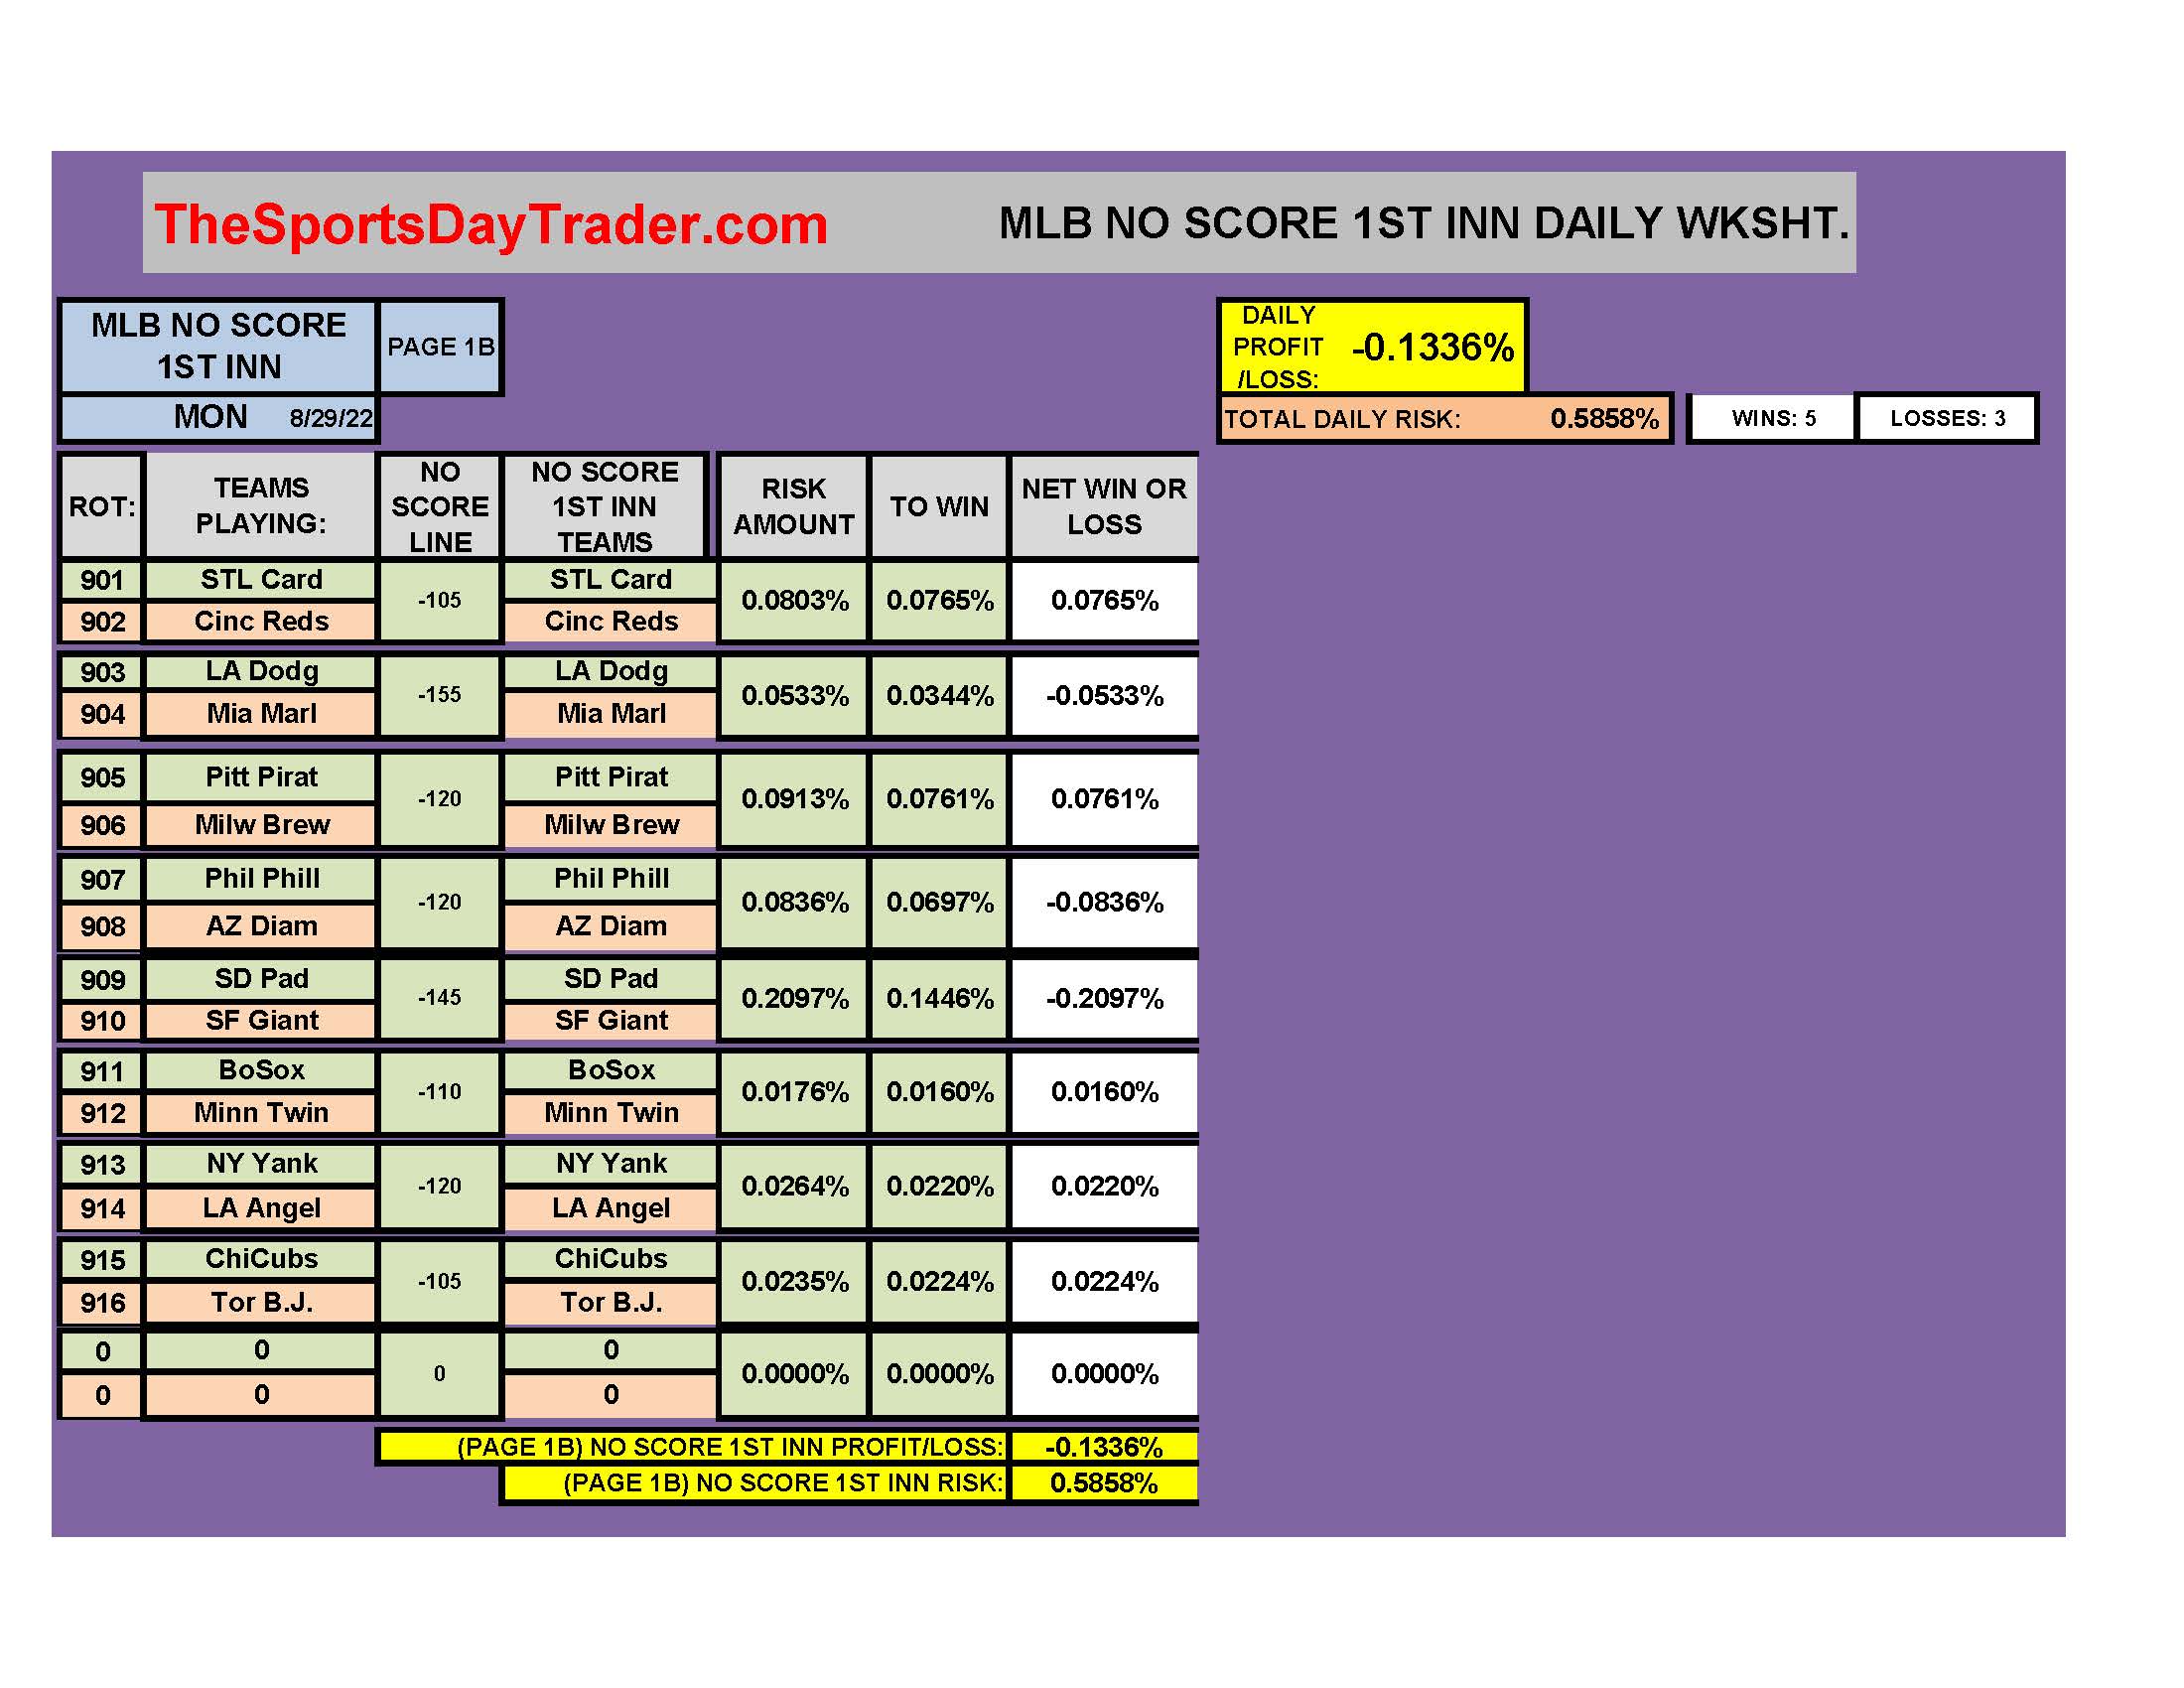 MLB 8/29/22 NO SCORE 1ST INNING DAILY RESULTS